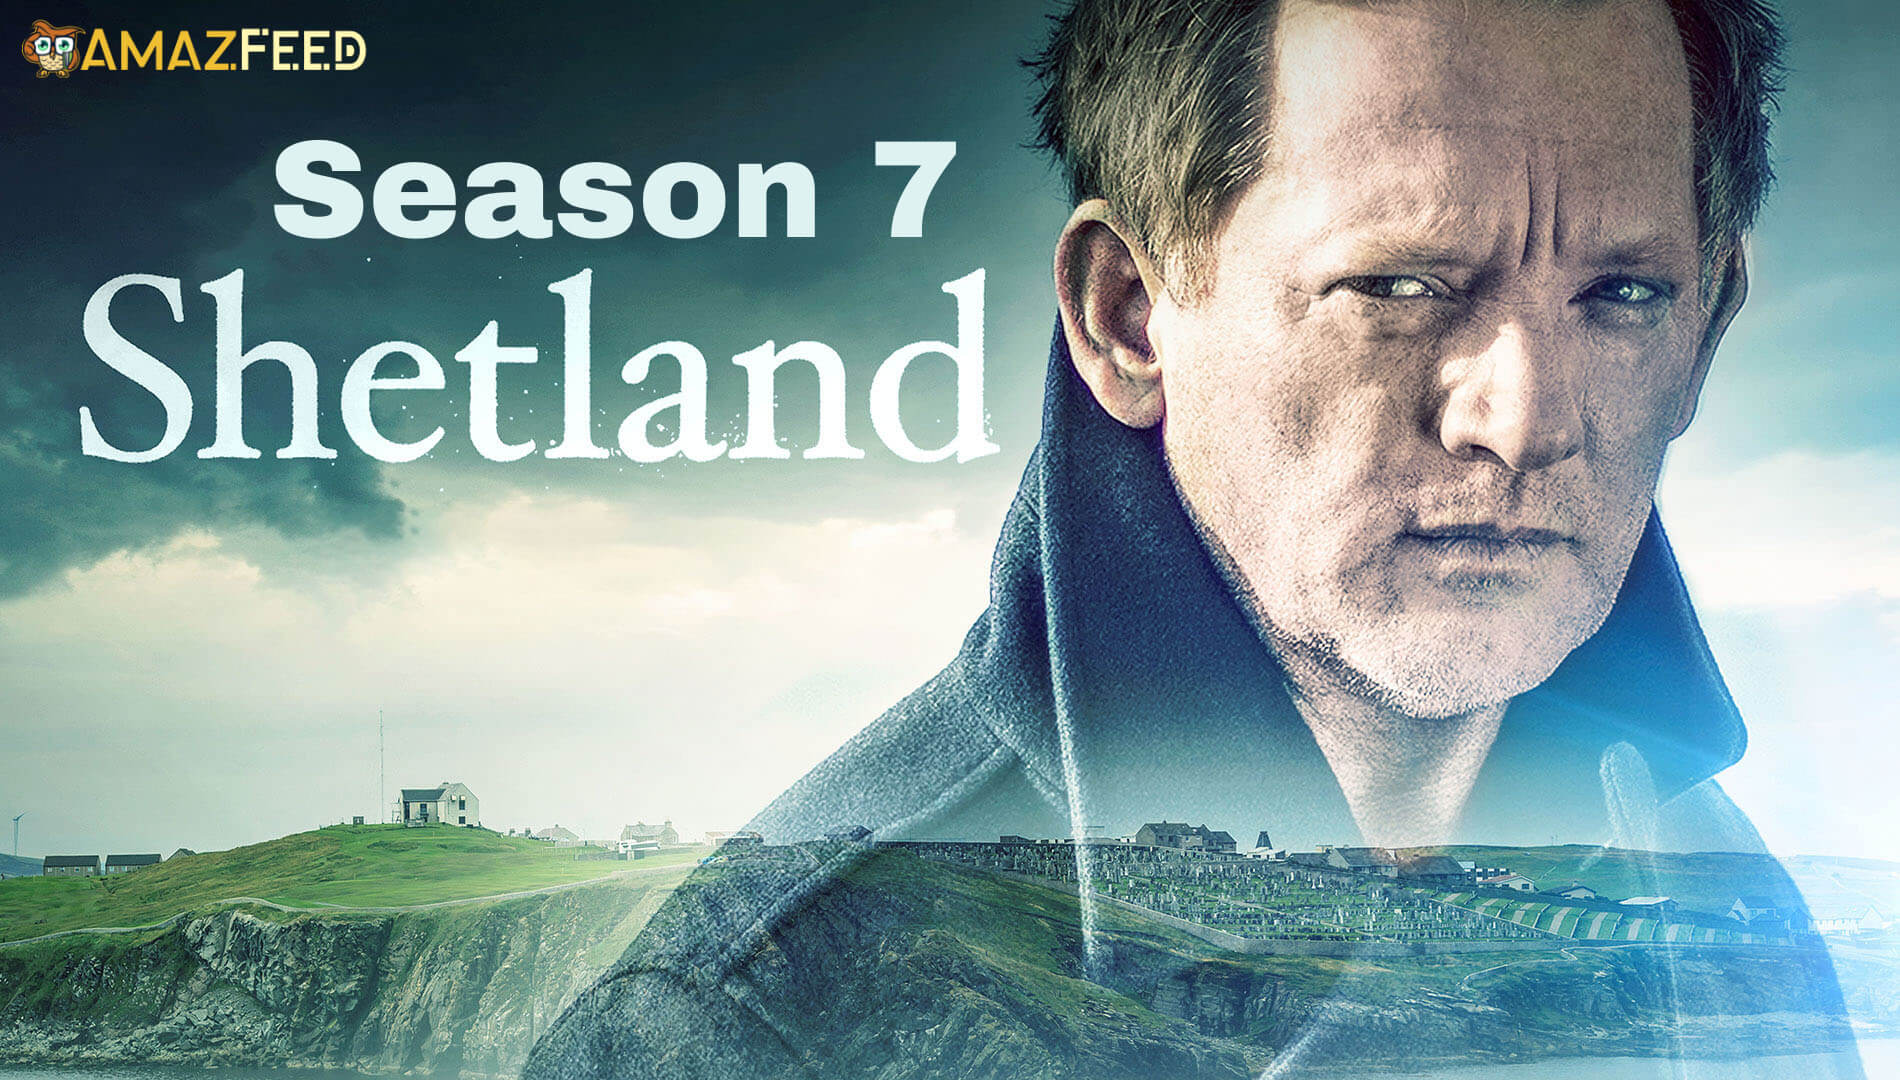 Where was the Shetland TV series being filmedWhere was the Shetland TV series being filmed